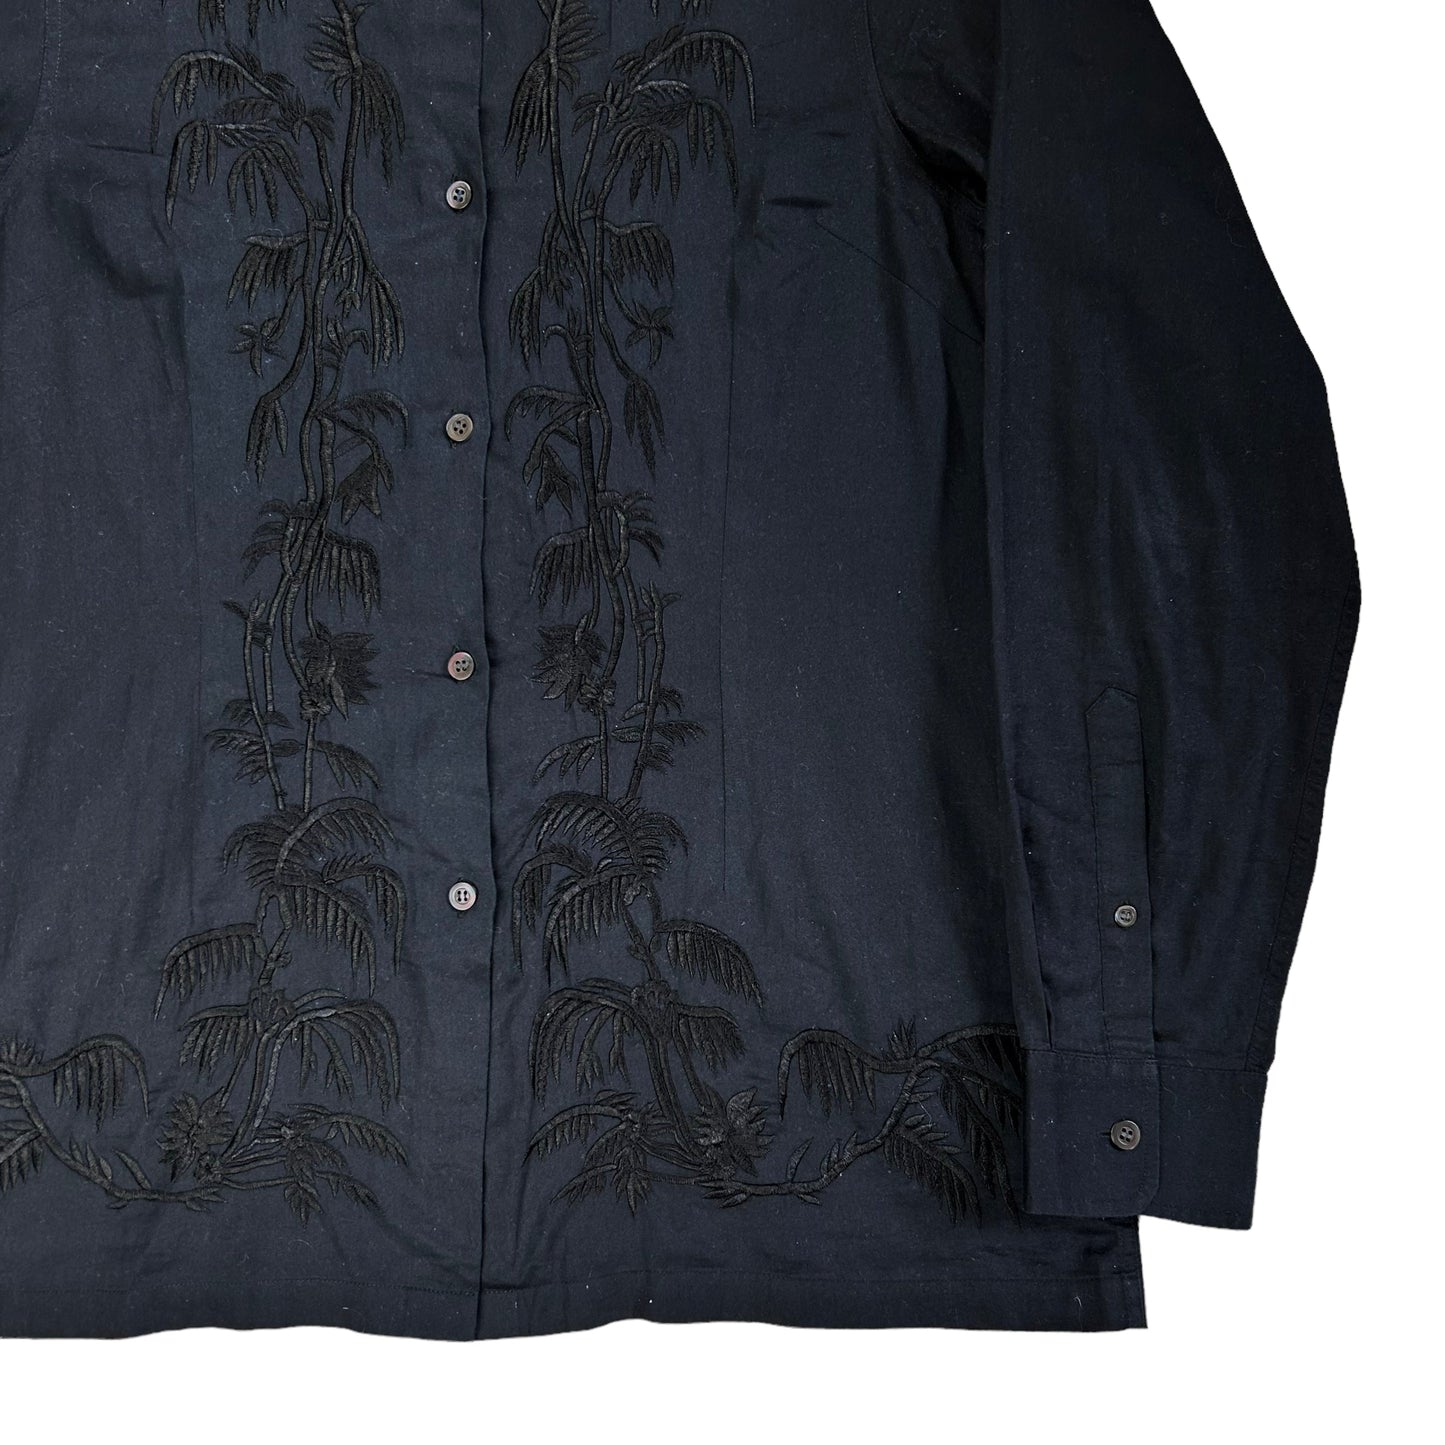 Dries Van Noten Psychedelic Palms Embroidery Shirt - SS21